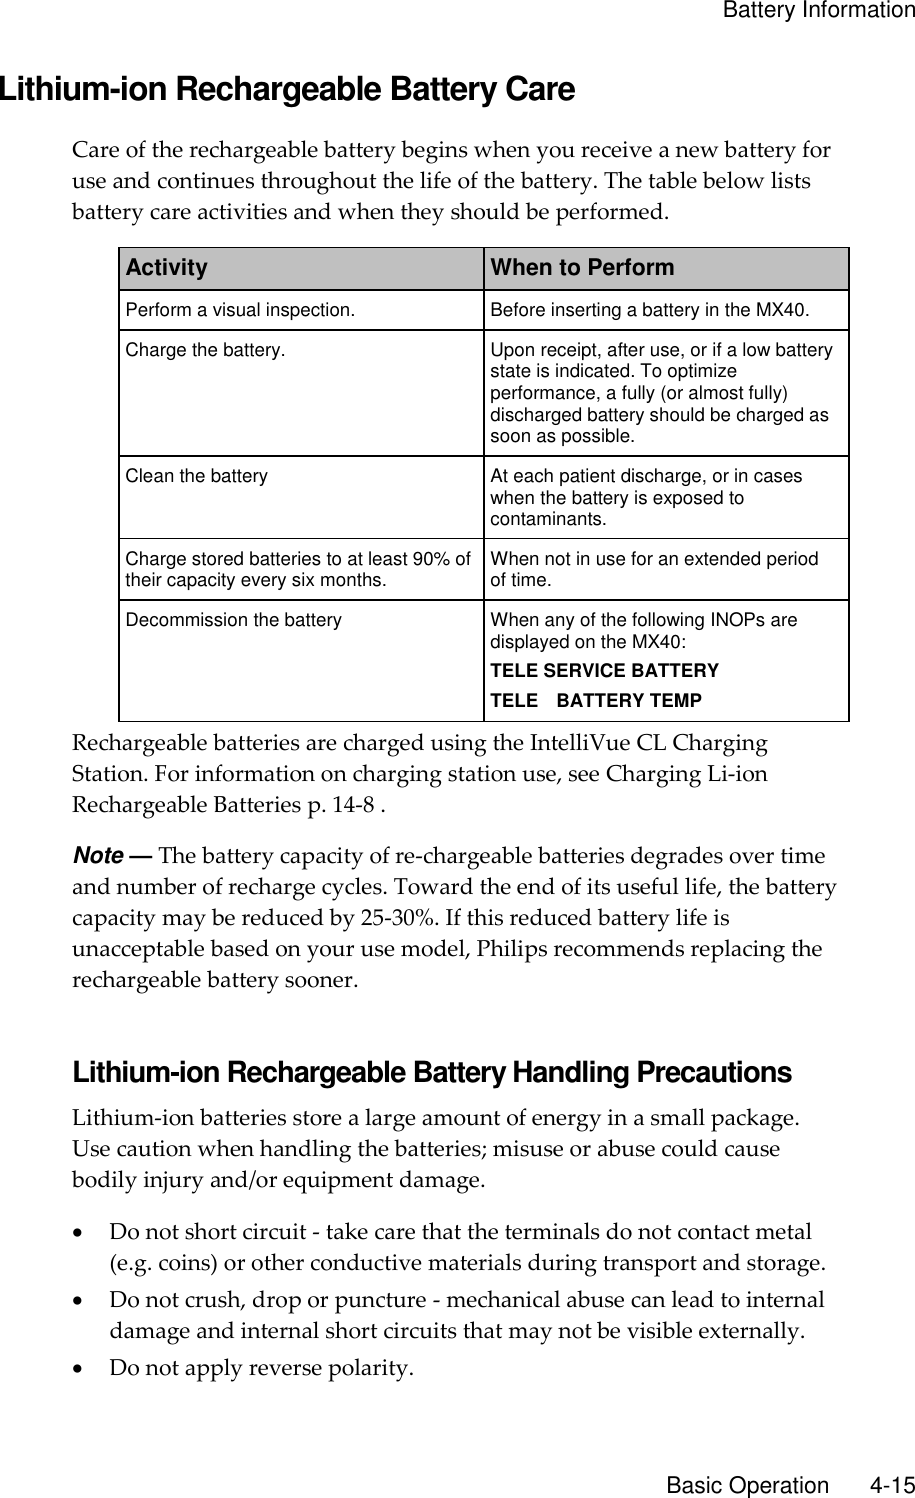     Battery Information       Basic Operation       4-15 Lithium-ion Rechargeable Battery Care Care of the rechargeable battery begins when you receive a new battery for use and continues throughout the life of the battery. The table below lists battery care activities and when they should be performed. Activity When to Perform Perform a visual inspection. Before inserting a battery in the MX40. Charge the battery. Upon receipt, after use, or if a low battery state is indicated. To optimize performance, a fully (or almost fully) discharged battery should be charged as soon as possible. Clean the battery At each patient discharge, or in cases when the battery is exposed to contaminants. Charge stored batteries to at least 90% of their capacity every six months. When not in use for an extended period of time. Decommission the battery When any of the following INOPs are displayed on the MX40: TELE SERVICE BATTERY TELE    BATTERY TEMP Rechargeable batteries are charged using the IntelliVue CL Charging Station. For information on charging station use, see Charging Li-ion Rechargeable Batteries p. 14-8 . Note — The battery capacity of re-chargeable batteries degrades over time and number of recharge cycles. Toward the end of its useful life, the battery capacity may be reduced by 25-30%. If this reduced battery life is unacceptable based on your use model, Philips recommends replacing the rechargeable battery sooner.  Lithium-ion Rechargeable Battery Handling Precautions Lithium-ion batteries store a large amount of energy in a small package. Use caution when handling the batteries; misuse or abuse could cause bodily injury and/or equipment damage.  Do not short circuit - take care that the terminals do not contact metal (e.g. coins) or other conductive materials during transport and storage.  Do not crush, drop or puncture - mechanical abuse can lead to internal damage and internal short circuits that may not be visible externally.  Do not apply reverse polarity. 